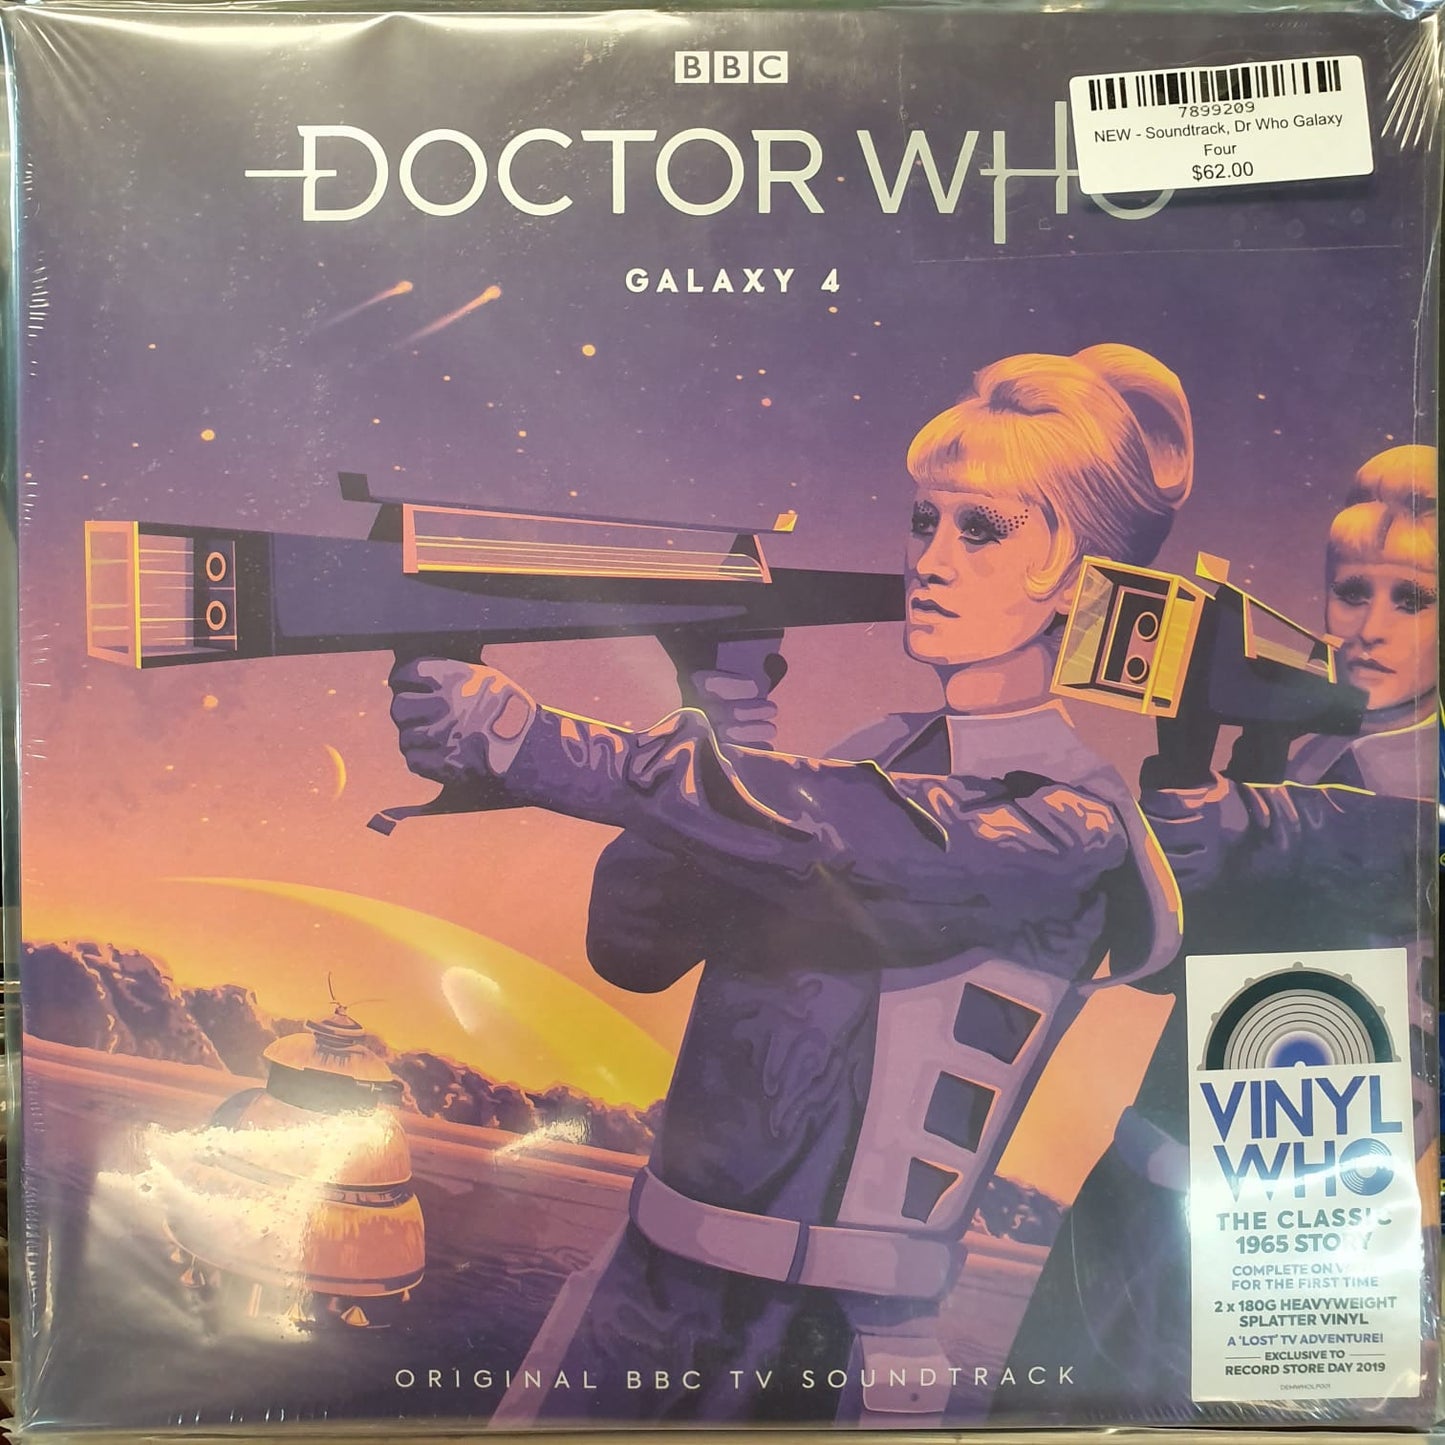 NEW - Soundtrack, Dr Who Galaxy Four Vinyl